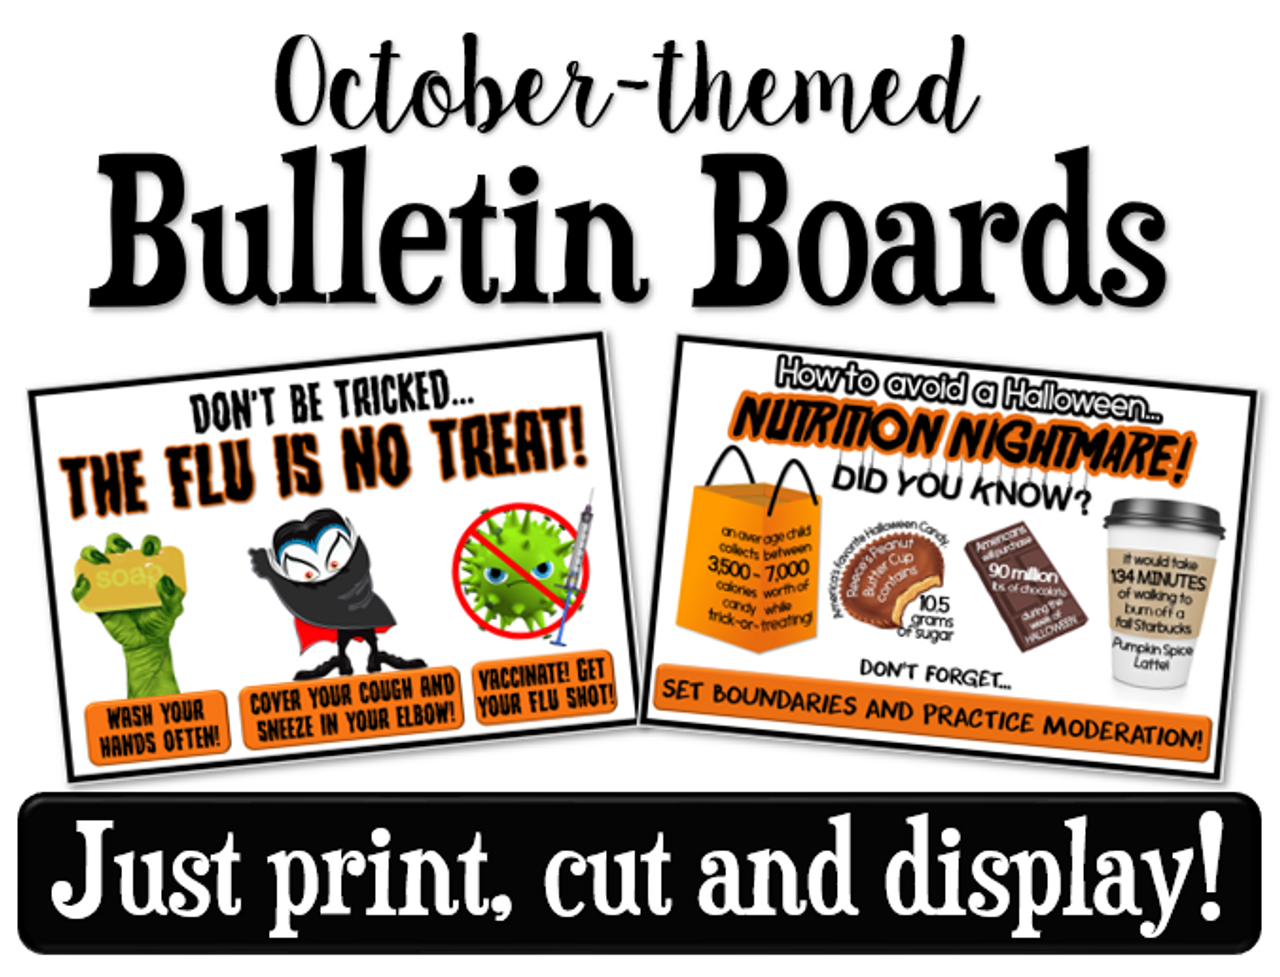 October Health-Themed Bulletin Board for Nutrition- Just print, cut and display!